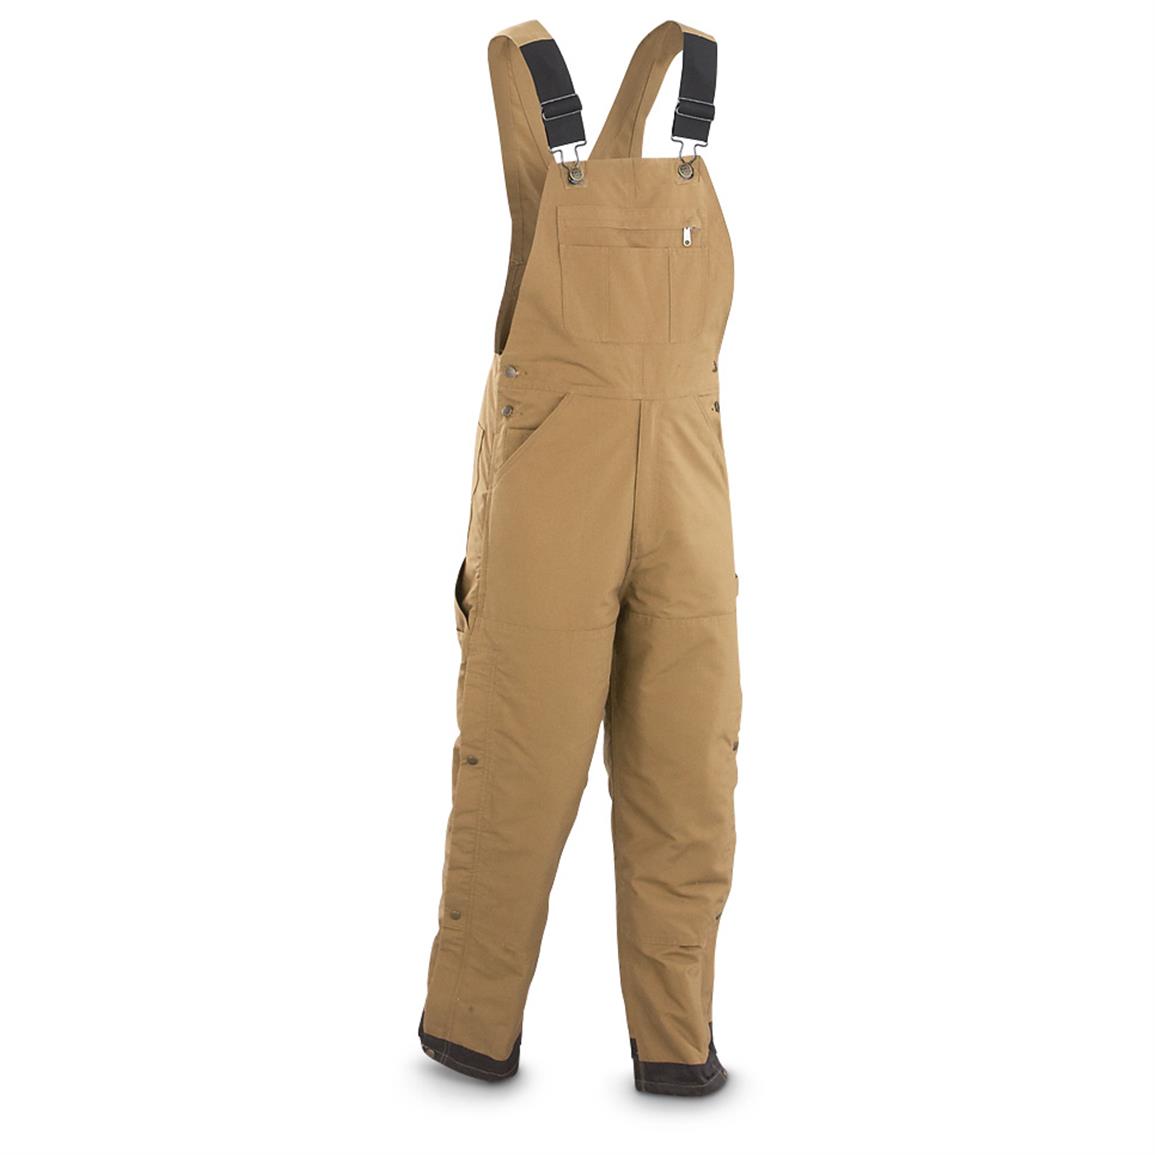 Berne Nesthorn Insulated Bibs - 614583, Insulated Pants, Overalls ...